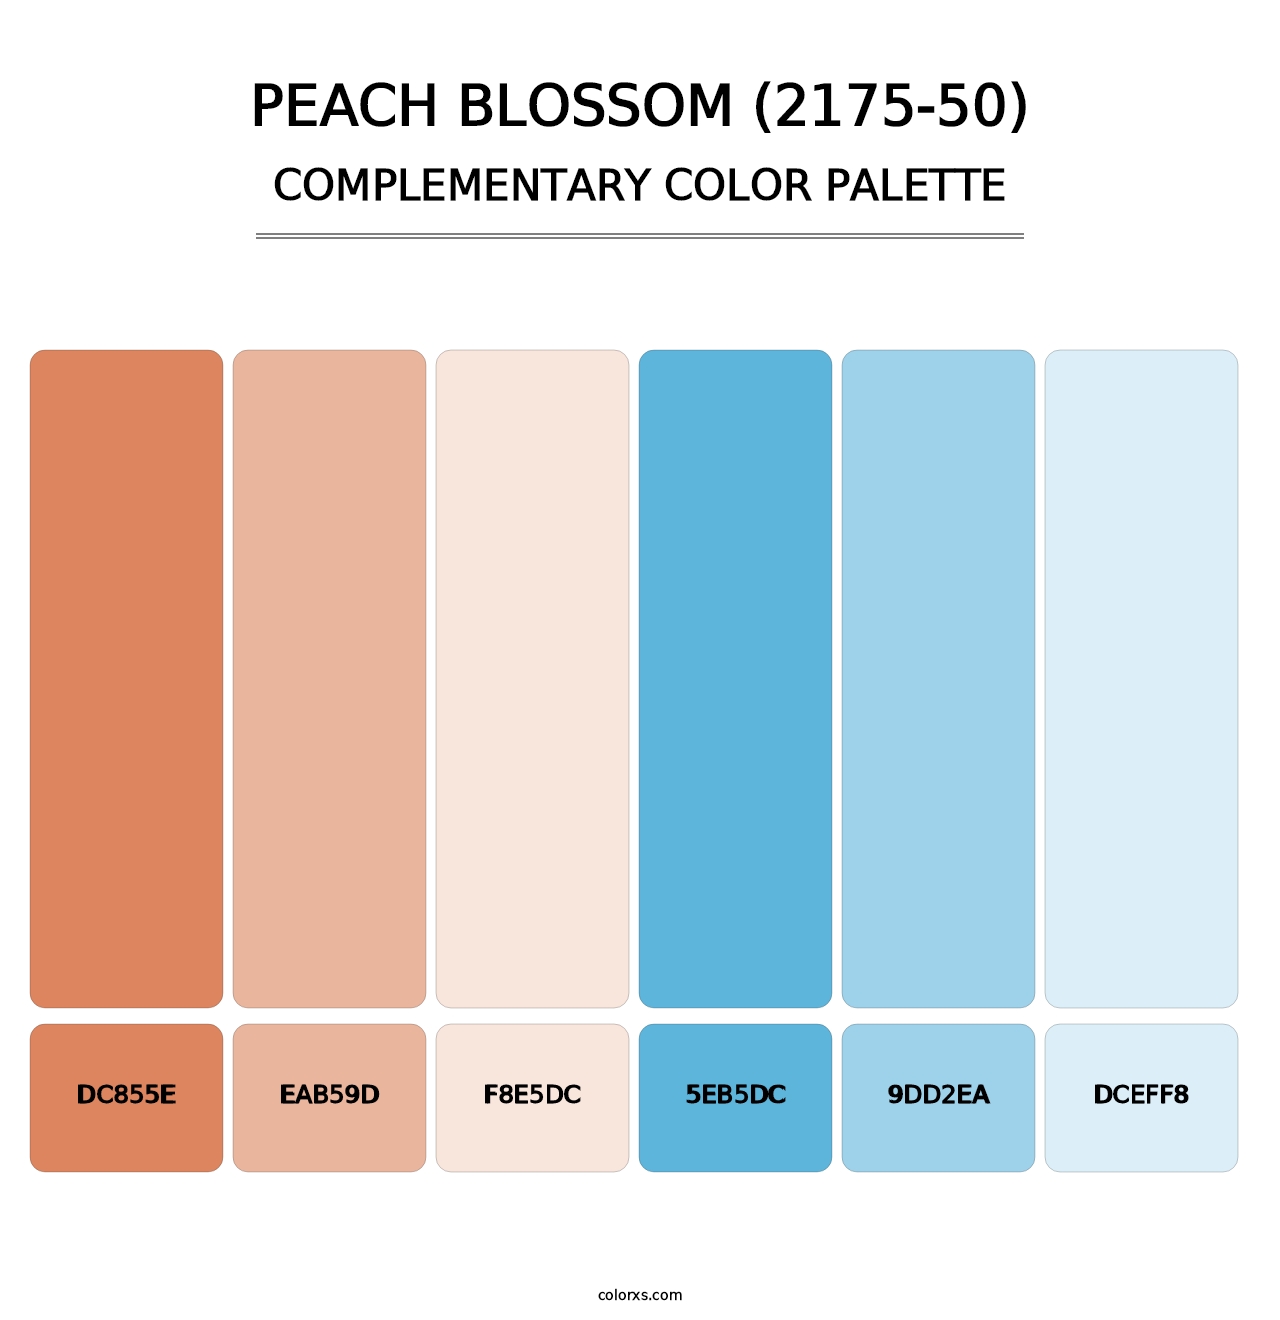 Peach Blossom (2175-50) - Complementary Color Palette